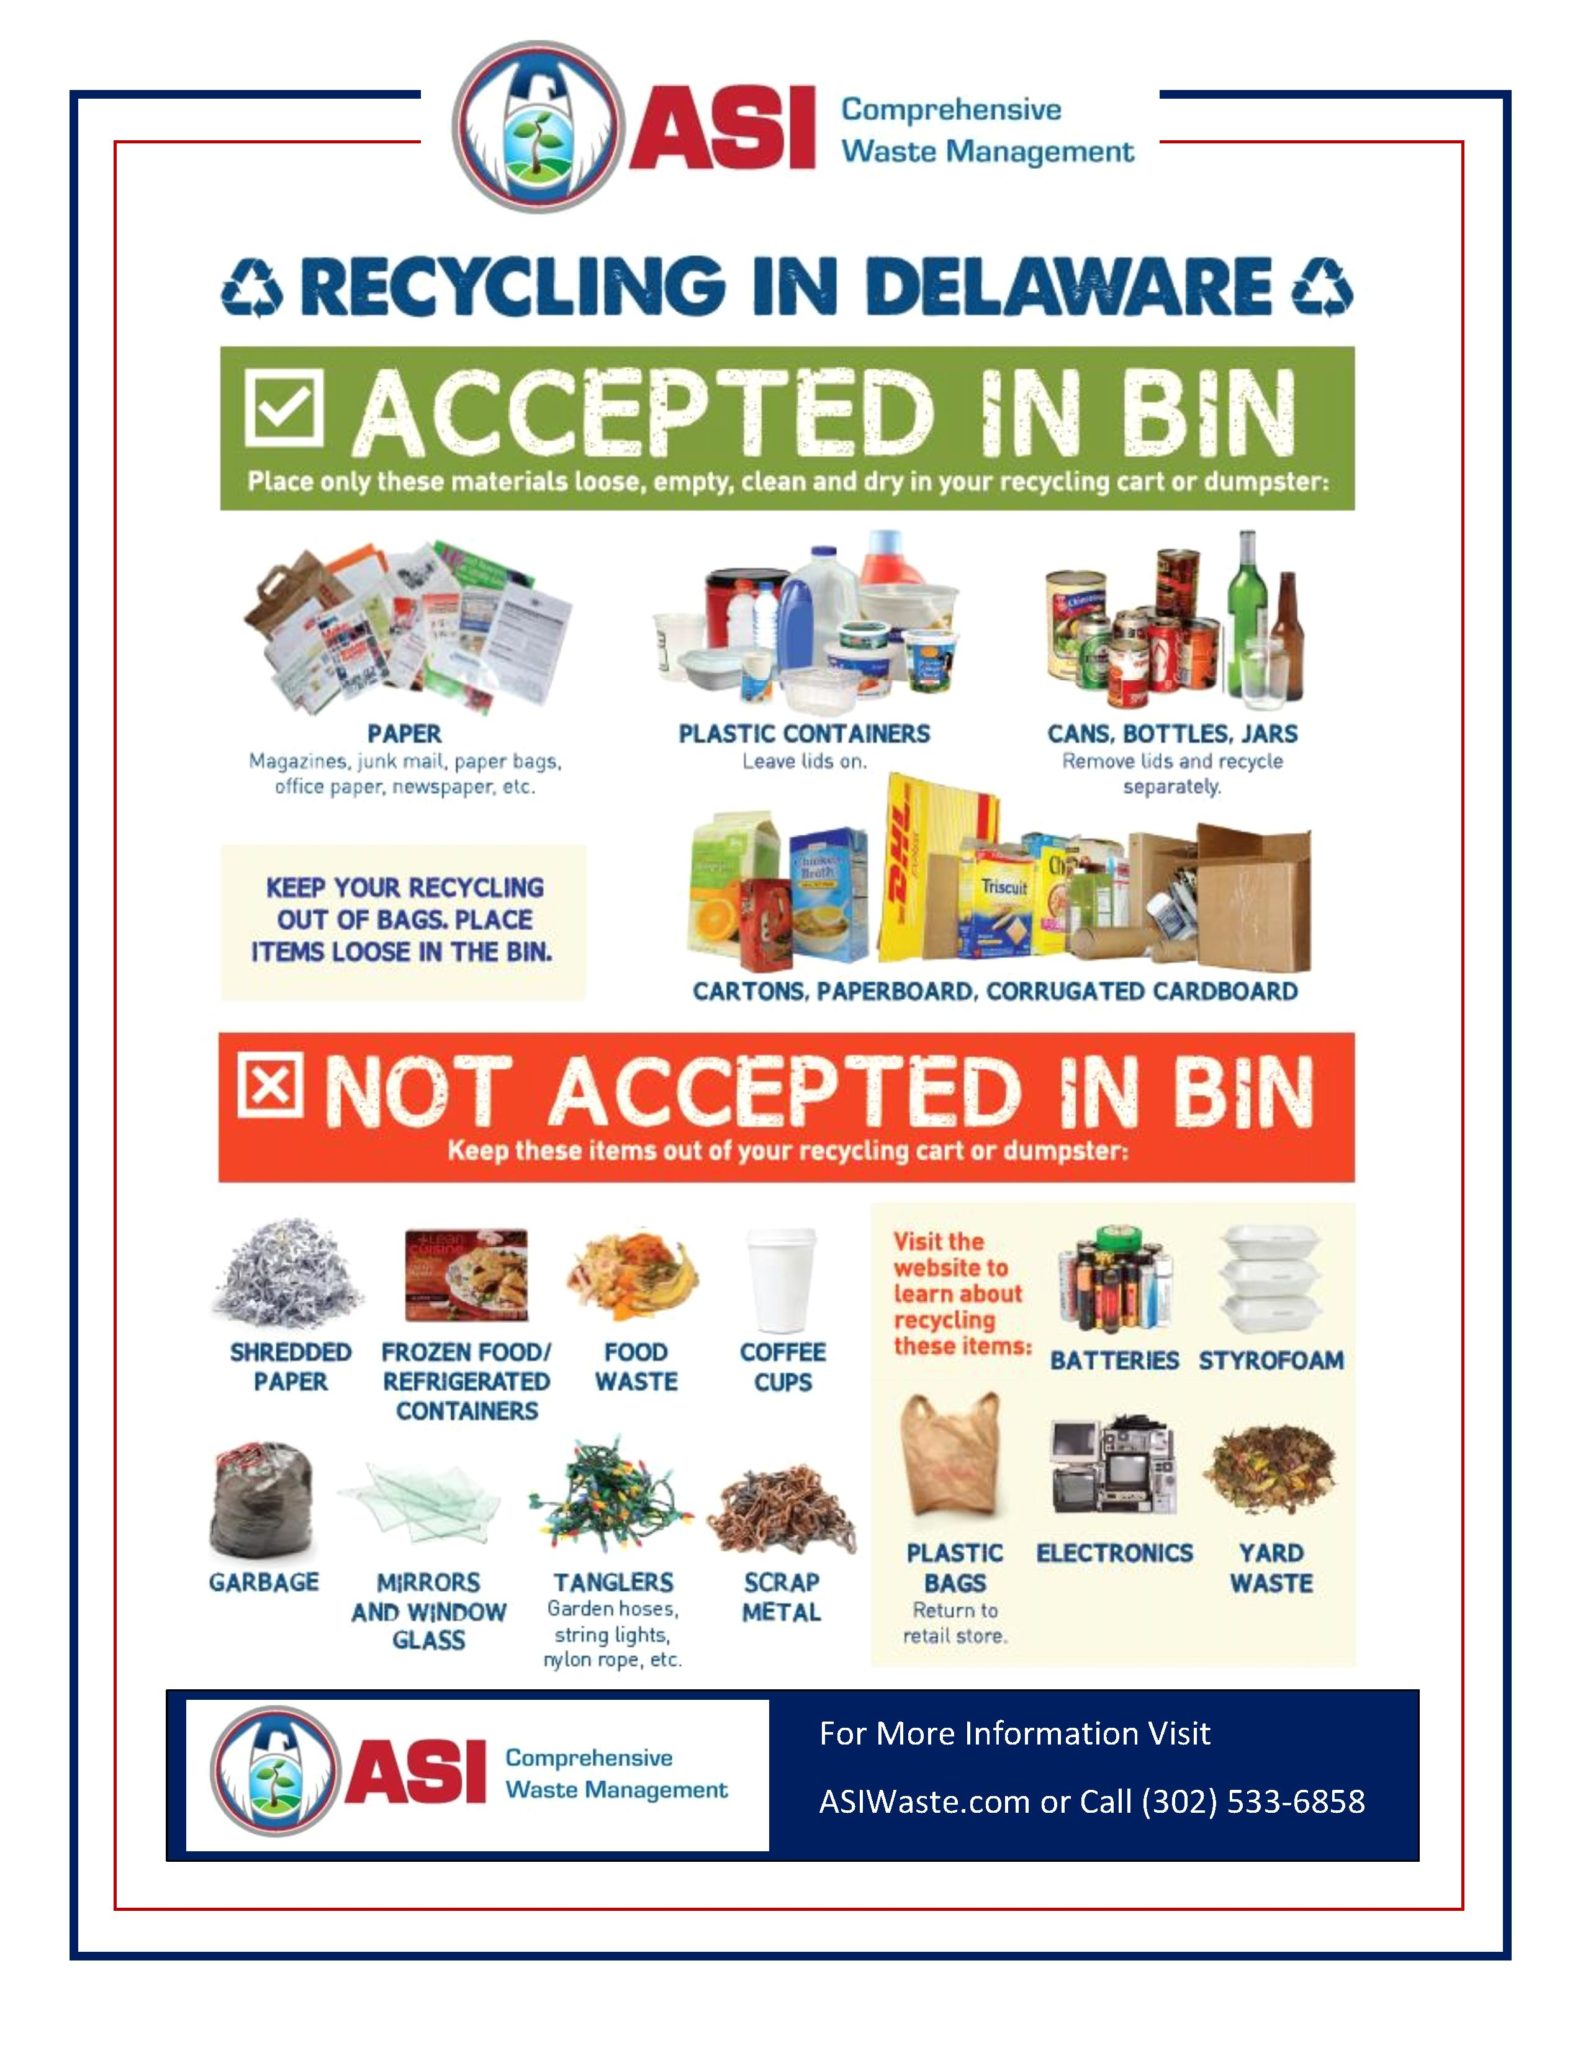 Recycling in Delaware — What Goes in the Bin? AdvantEdge Solutions